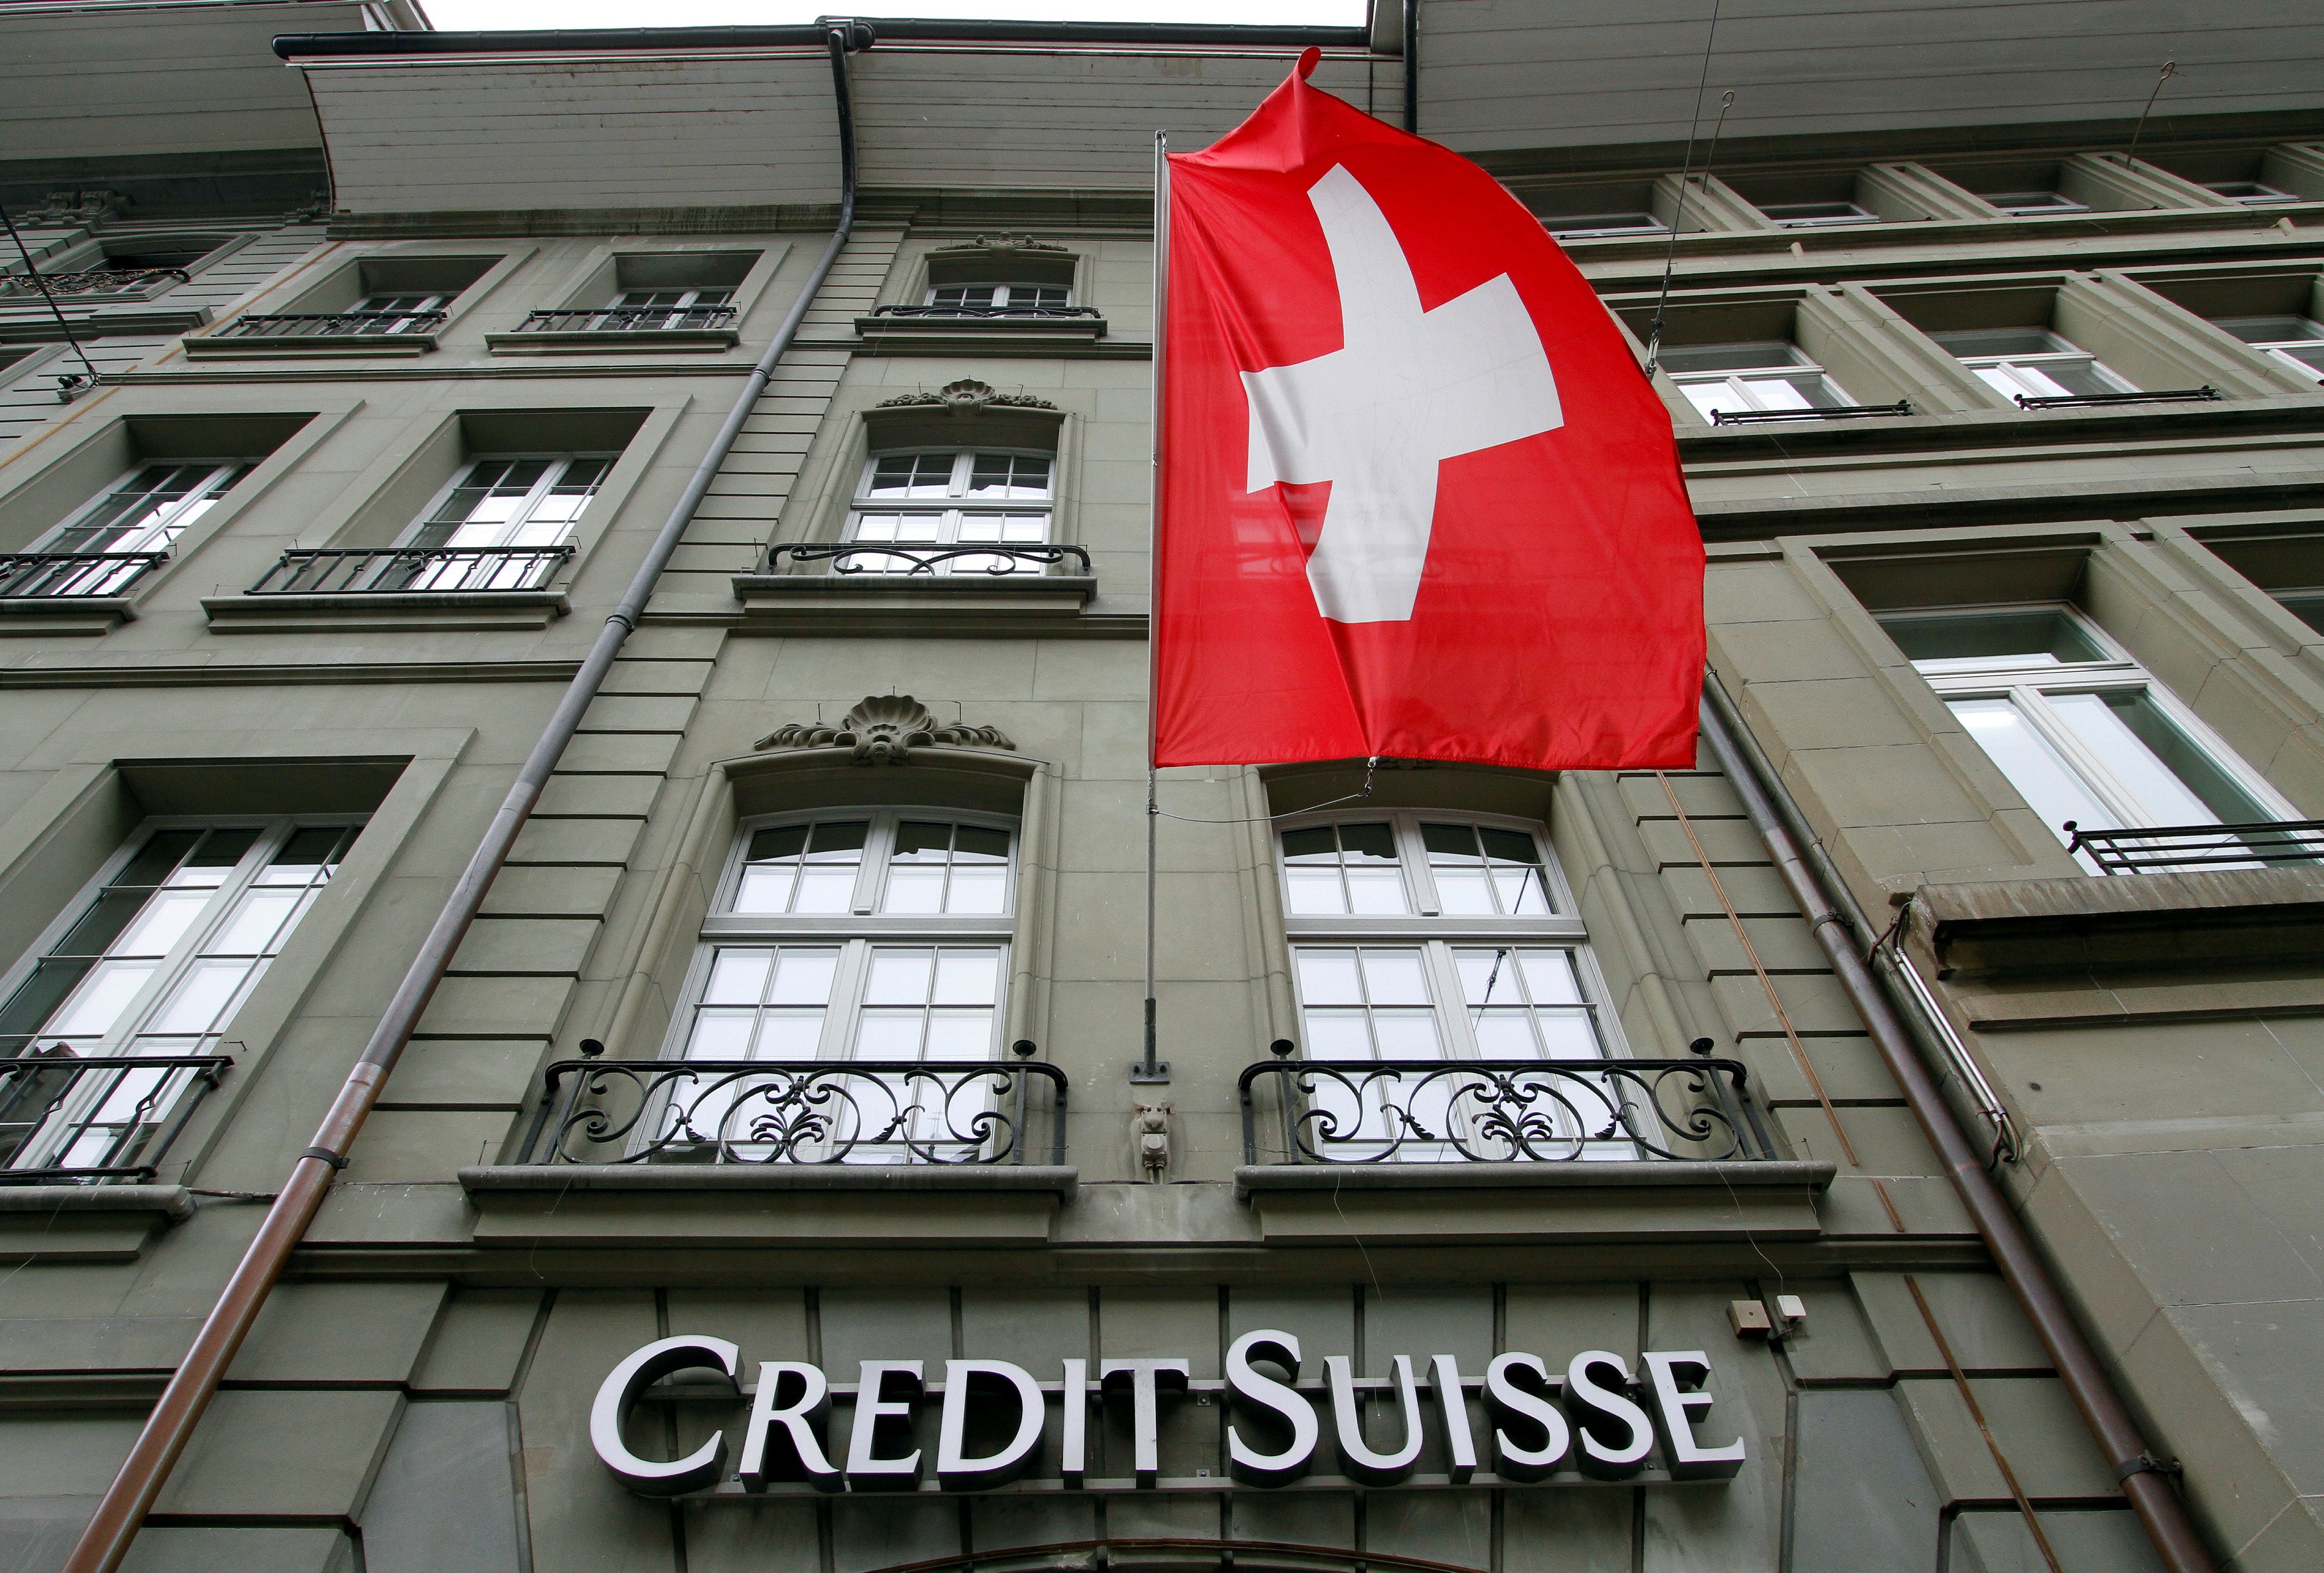 The Swiss bank Credit Suisse on Wednesday said it was being investigated by US regulators over its Asian hiring practices. Photo: Reuters